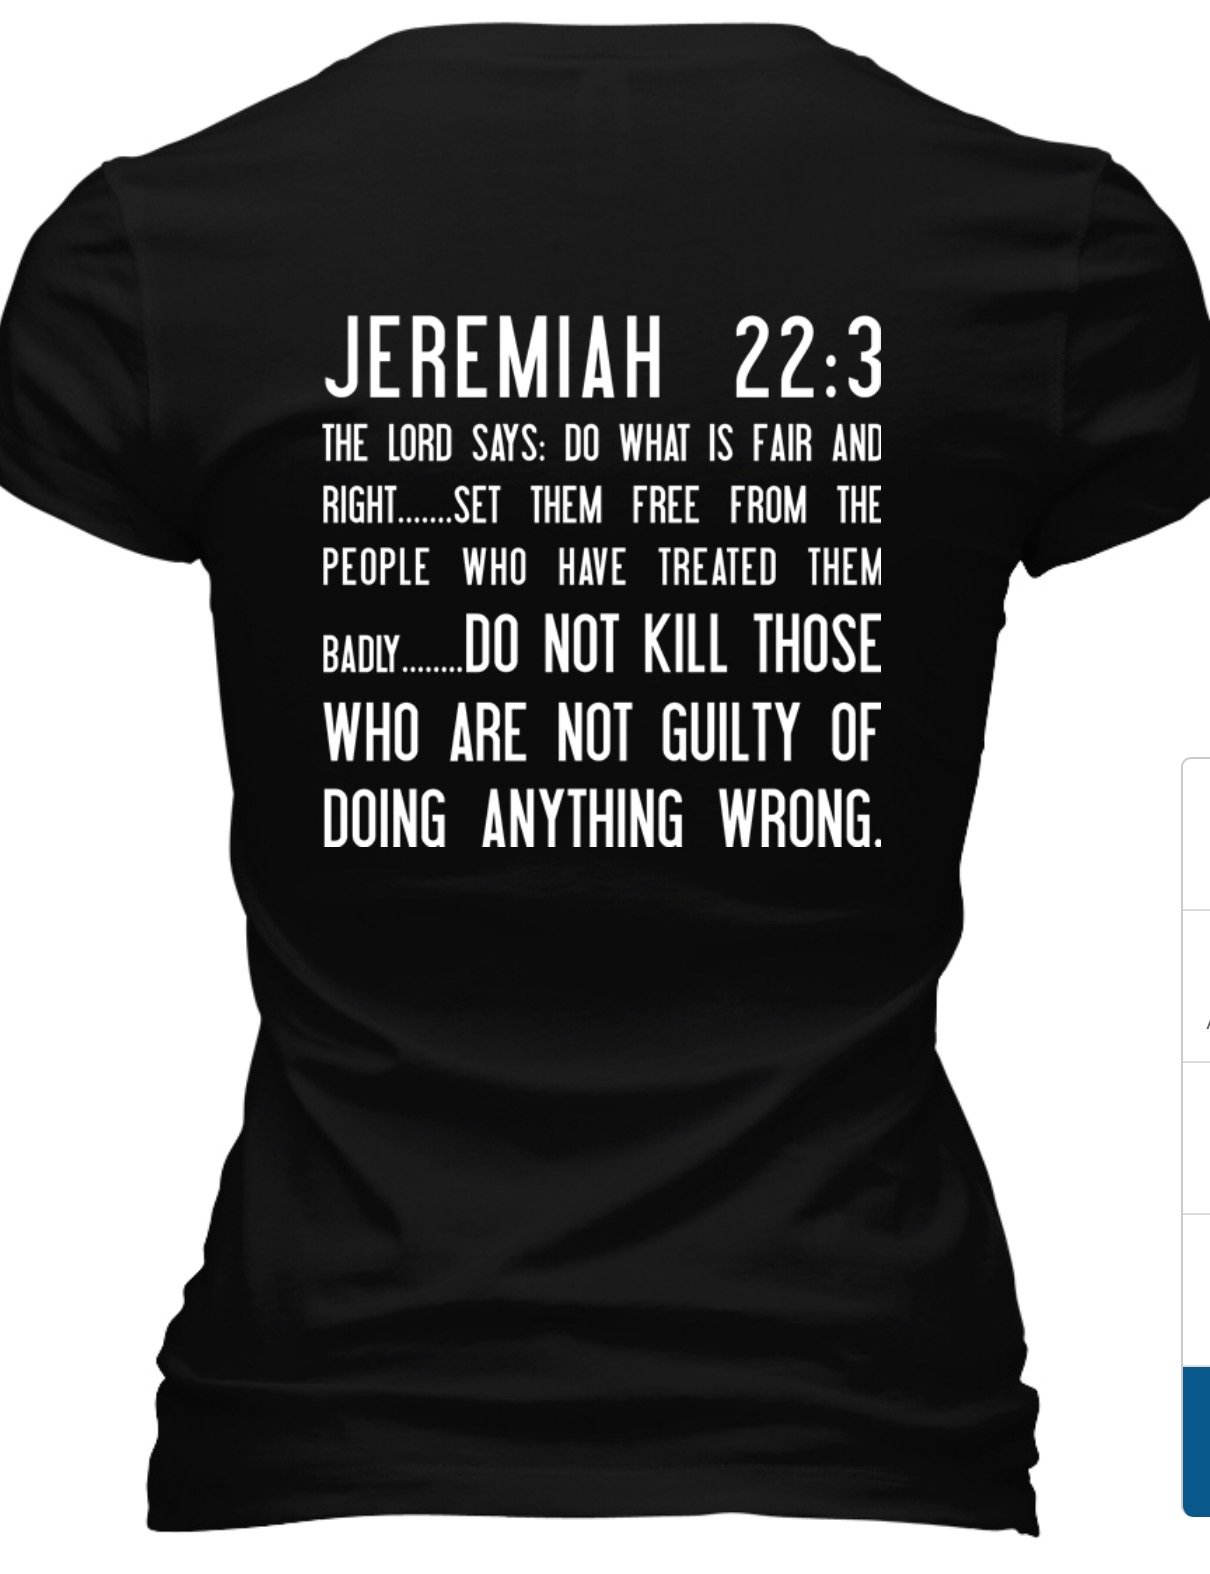 Image of WOMEN'S GOT JUSTICE? V-NECK T-SHIRT (Tshirt will reflect Jeremiah 22:3)